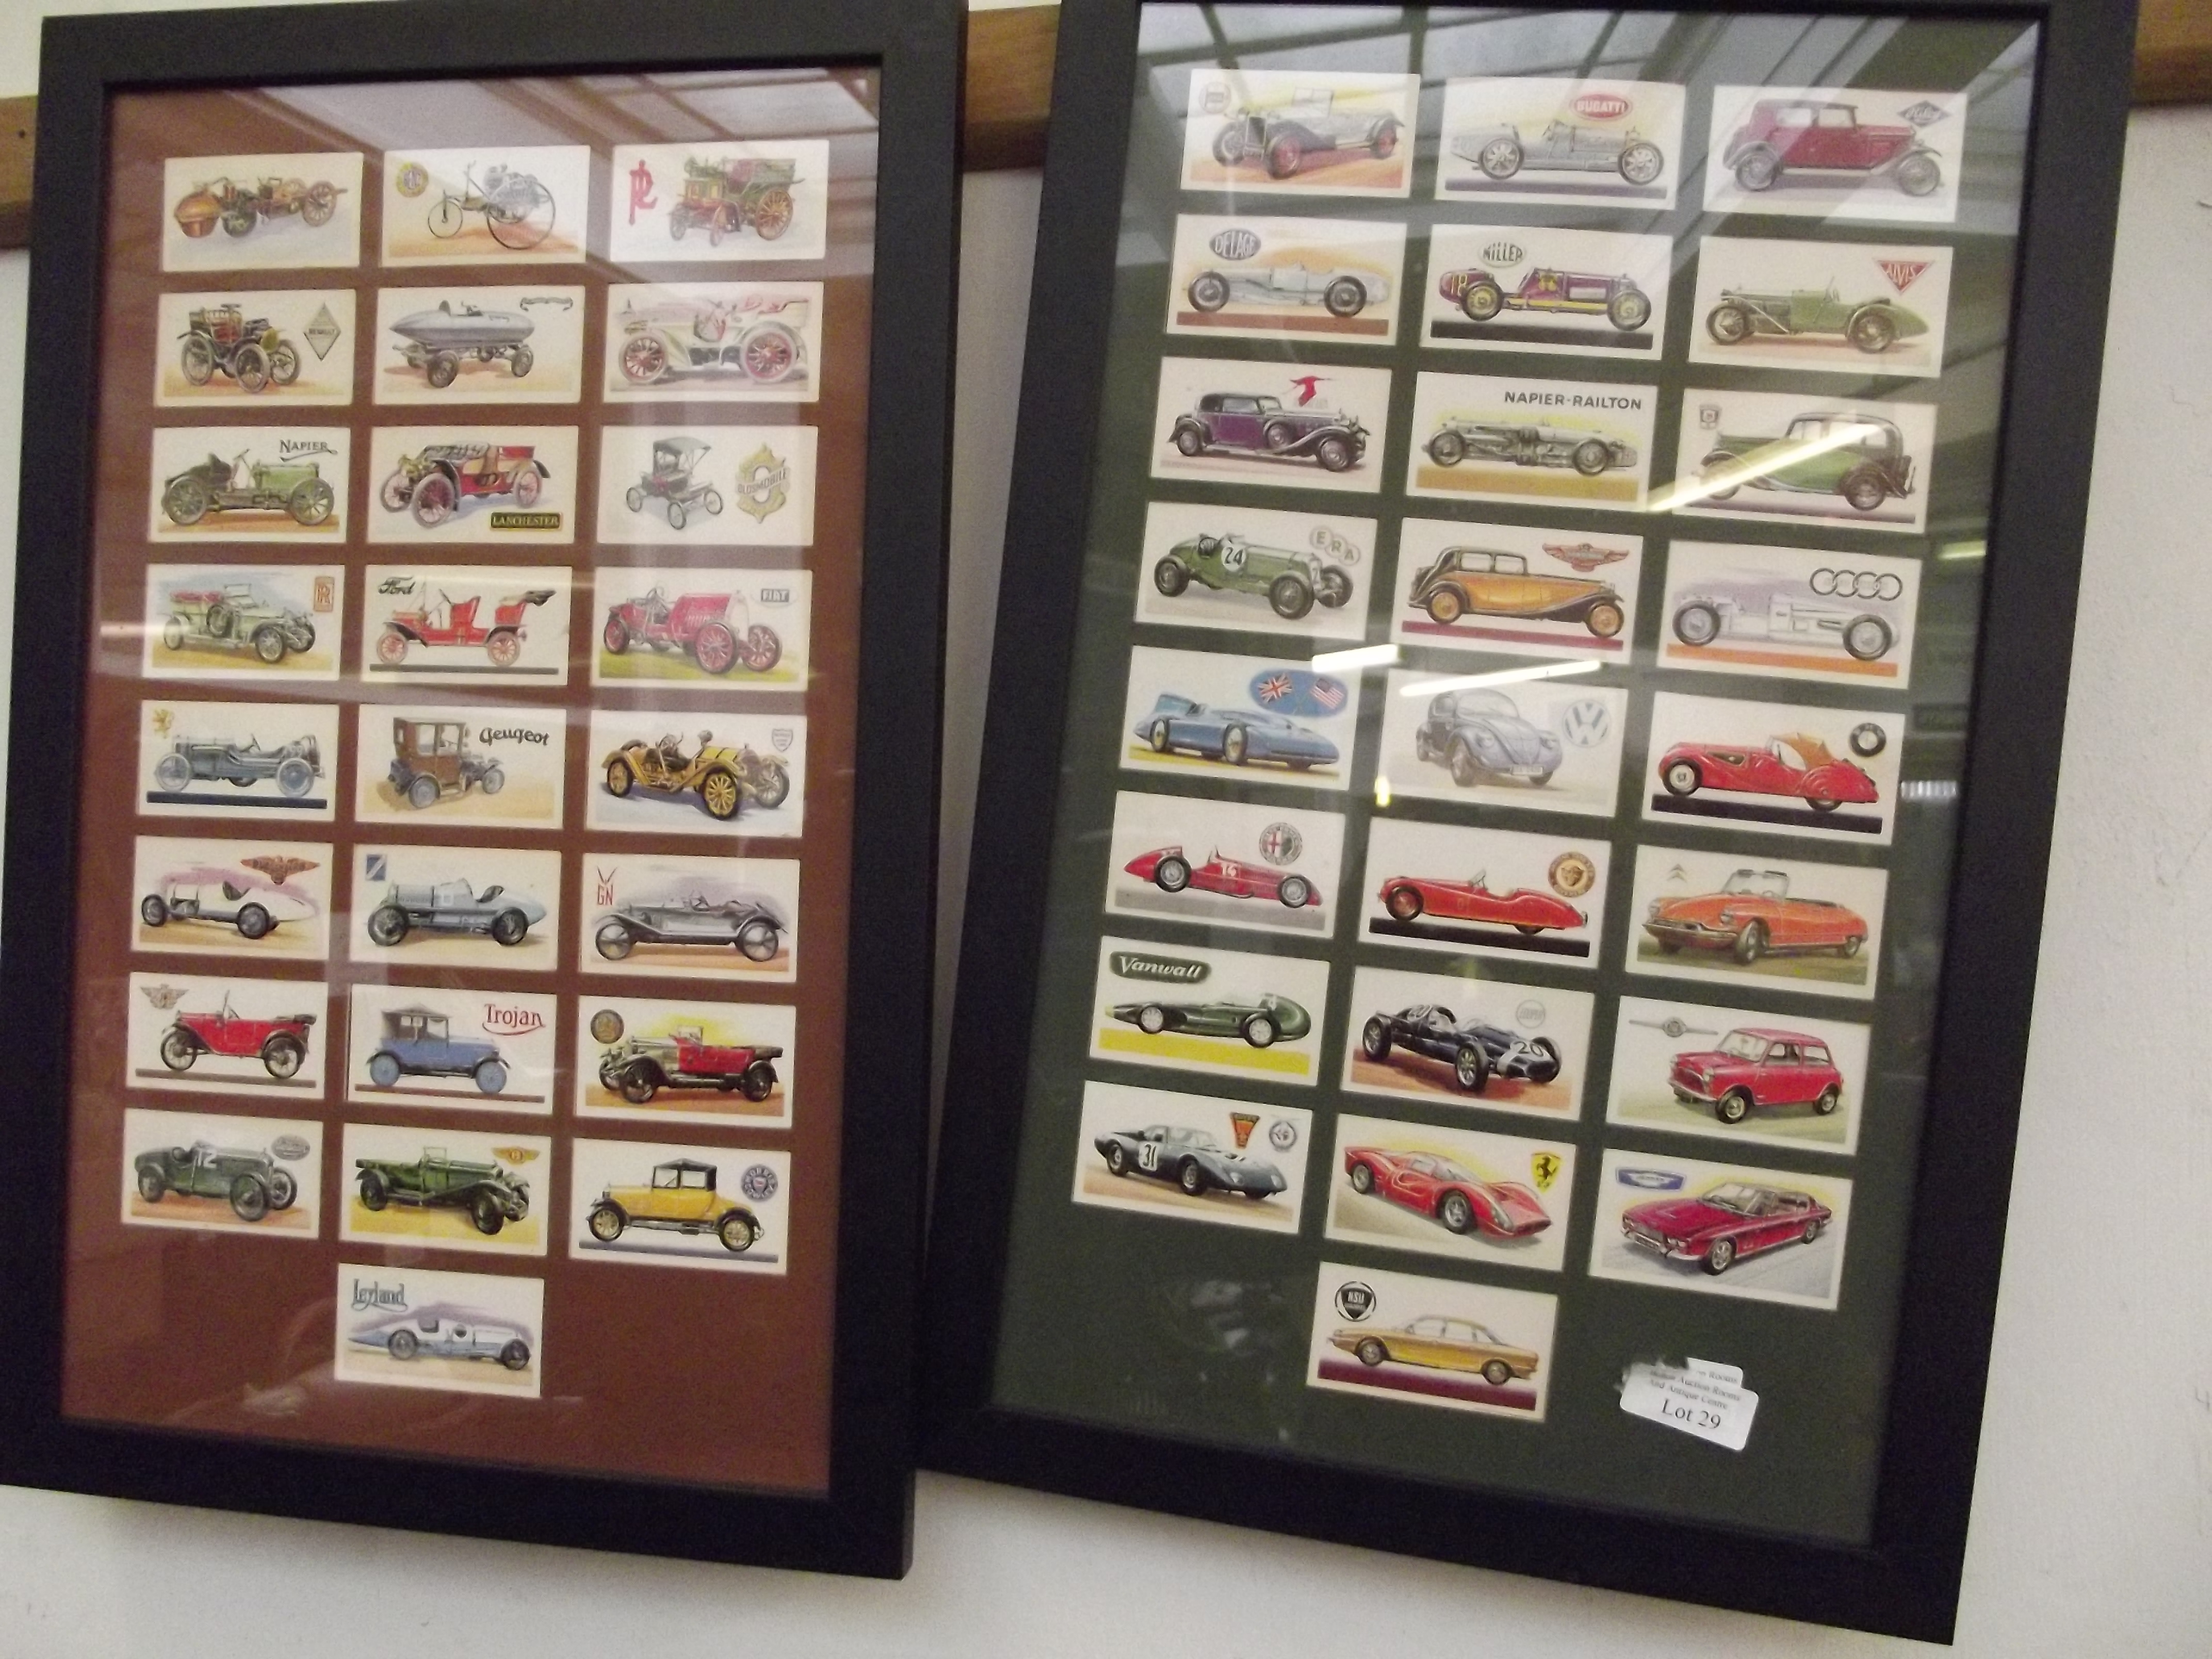 Two framed cigarette cards, classic cars